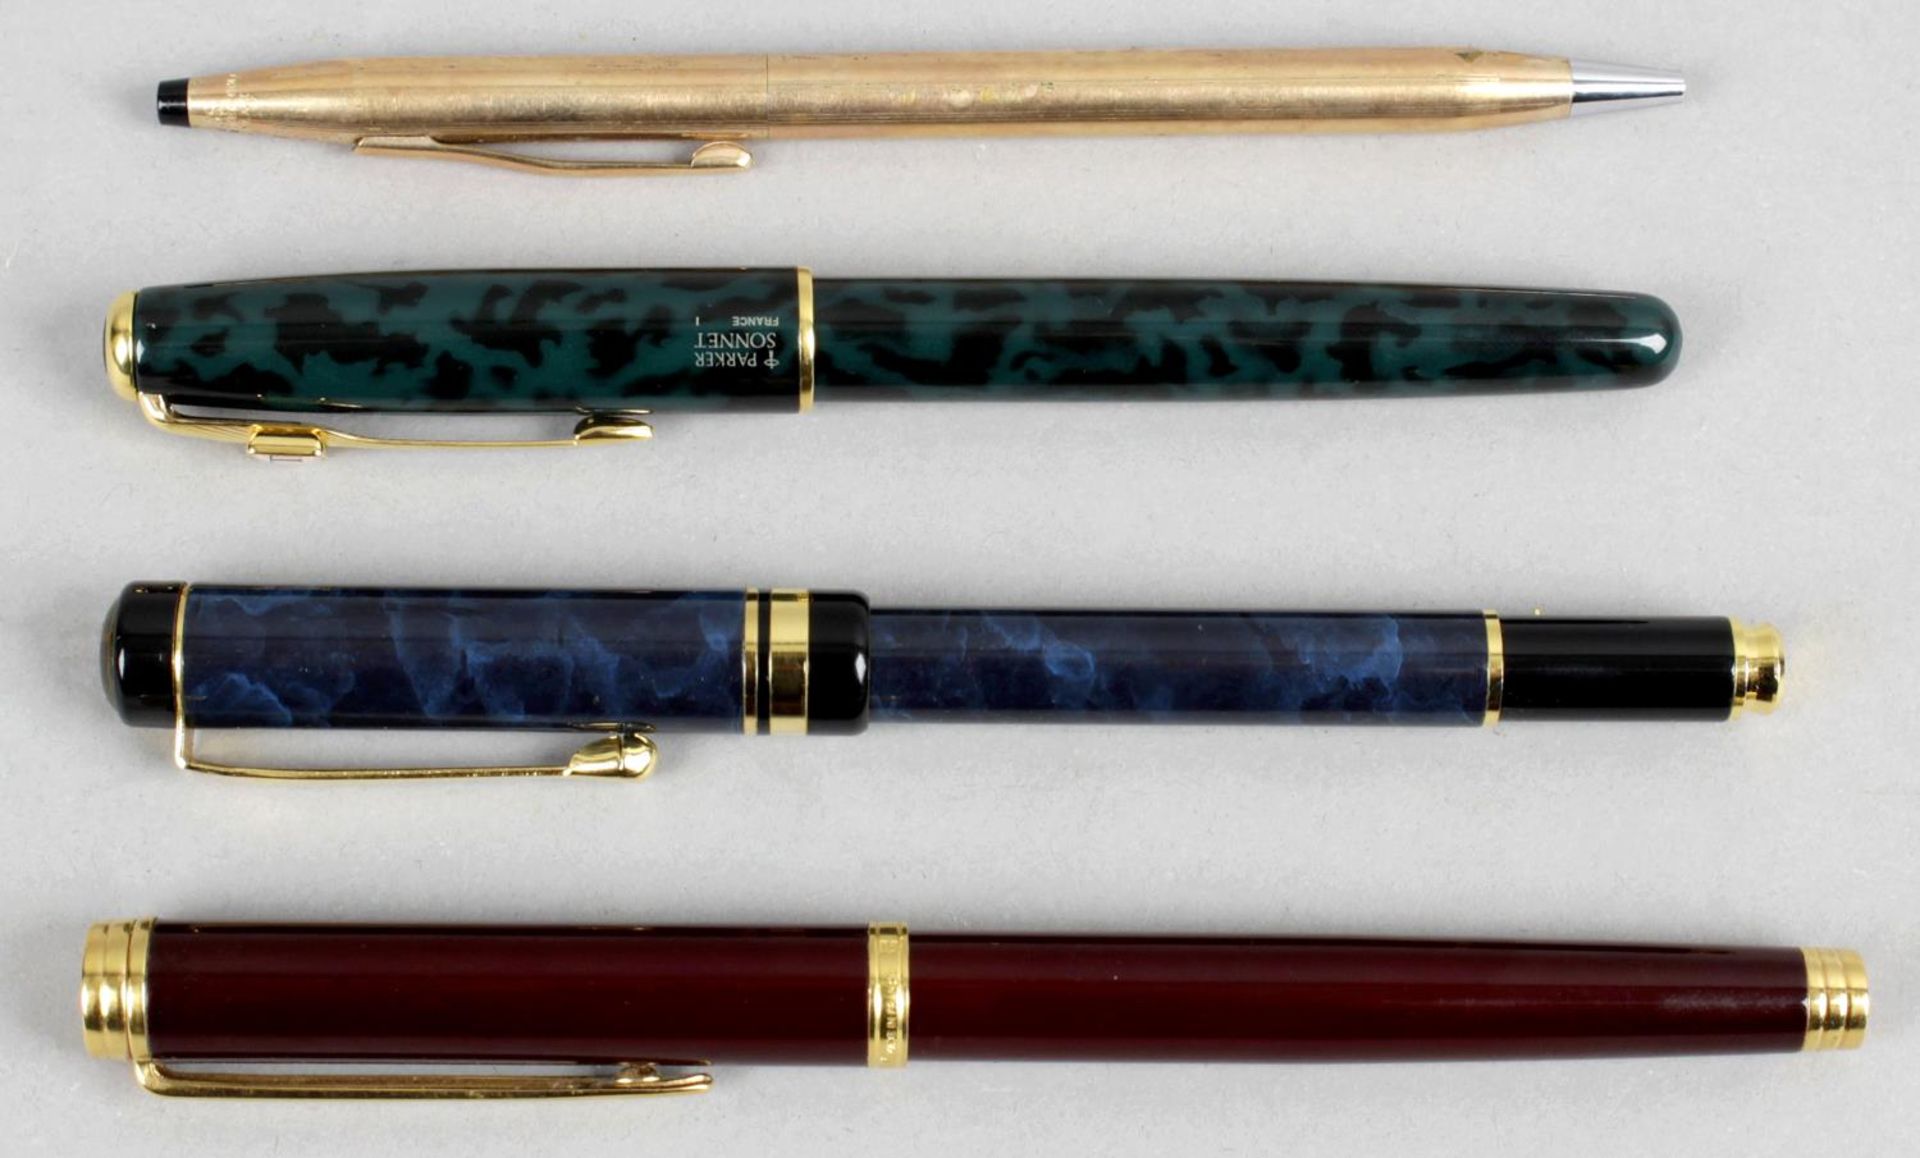 A Watermans fountain pen fitted with 18k gold nib,